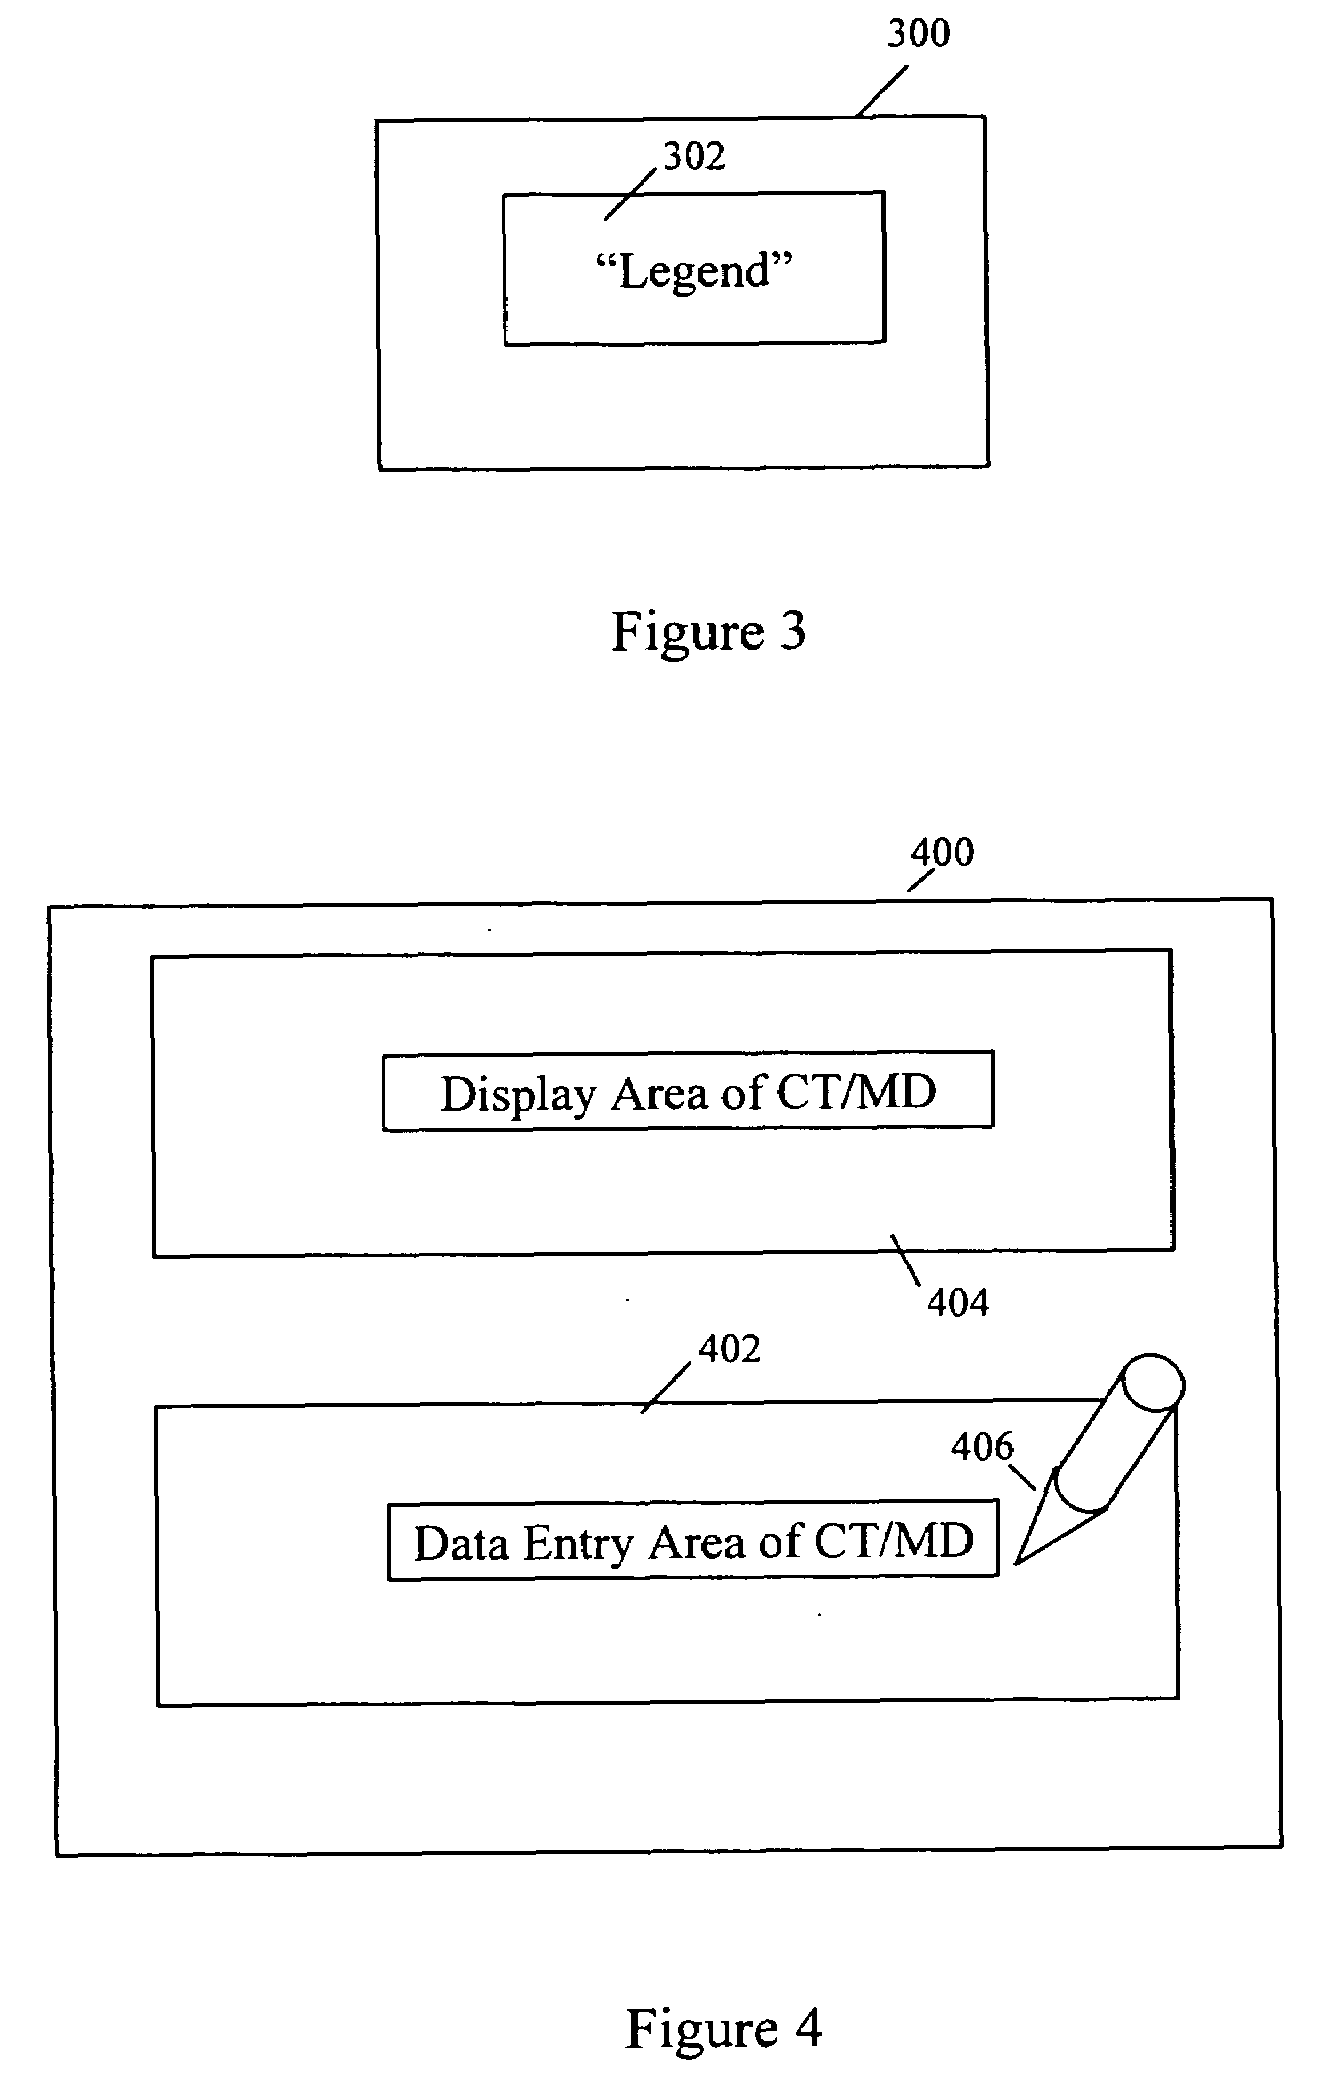 Configurable interface for devices